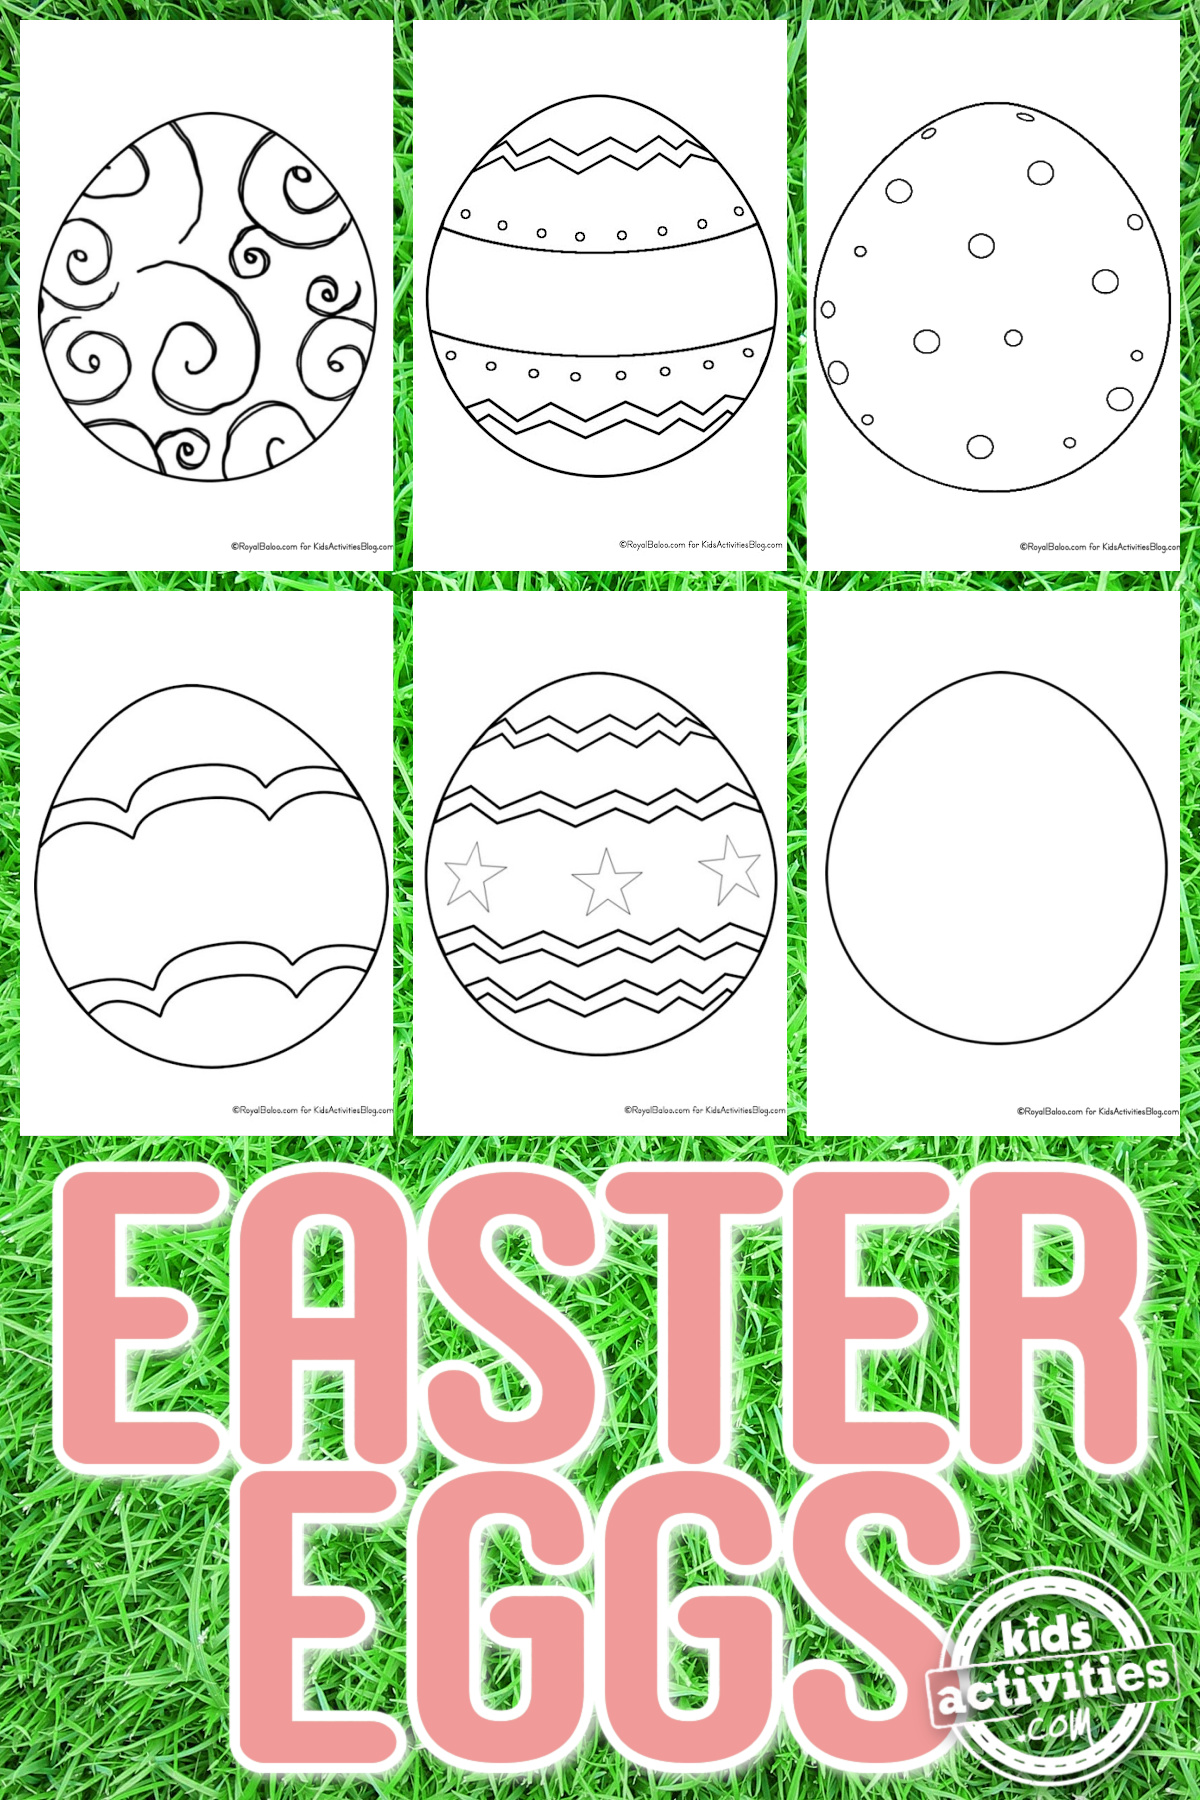 Easter egg coloring pages for kids kids activities blog